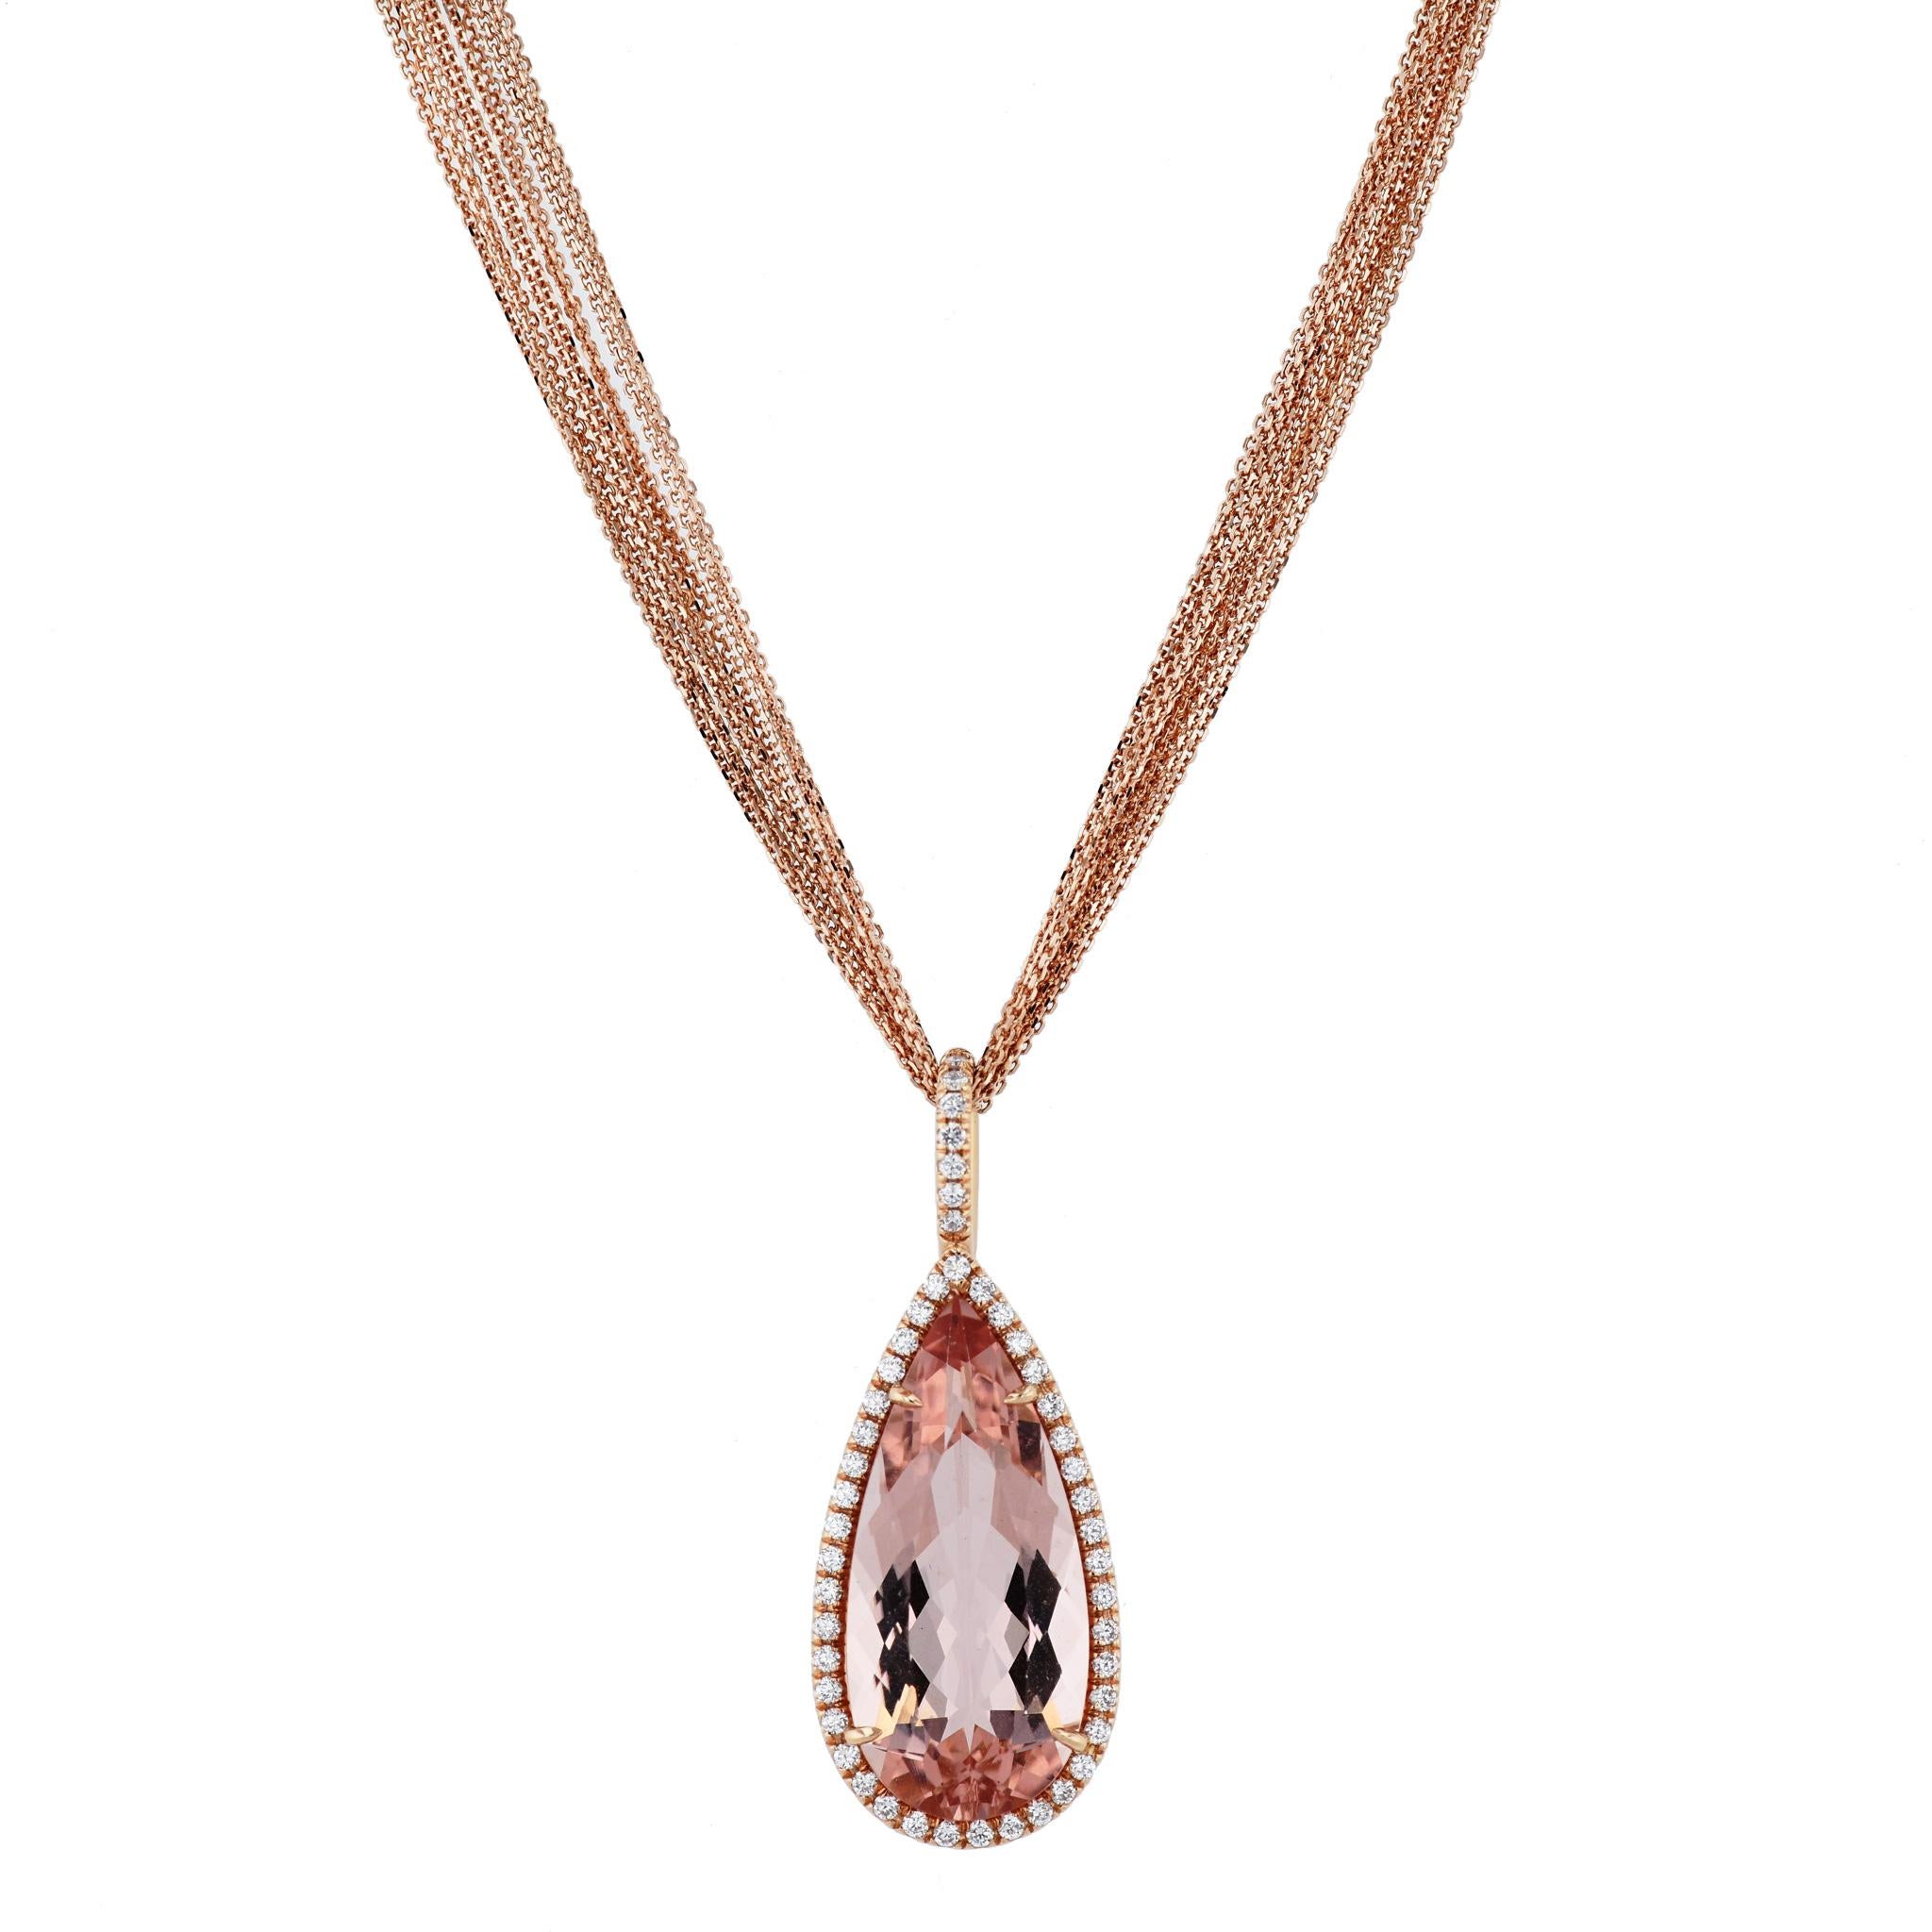 This exquisite H & H Collection pear shaped morganite pendant with a multi-strand rose gold necklace features 12.73 carat of morganite and an awe-inspiring 0.53 carat of pave mounted diamonds F/G VS1 (68 pieces in total). 
Fall in love with its